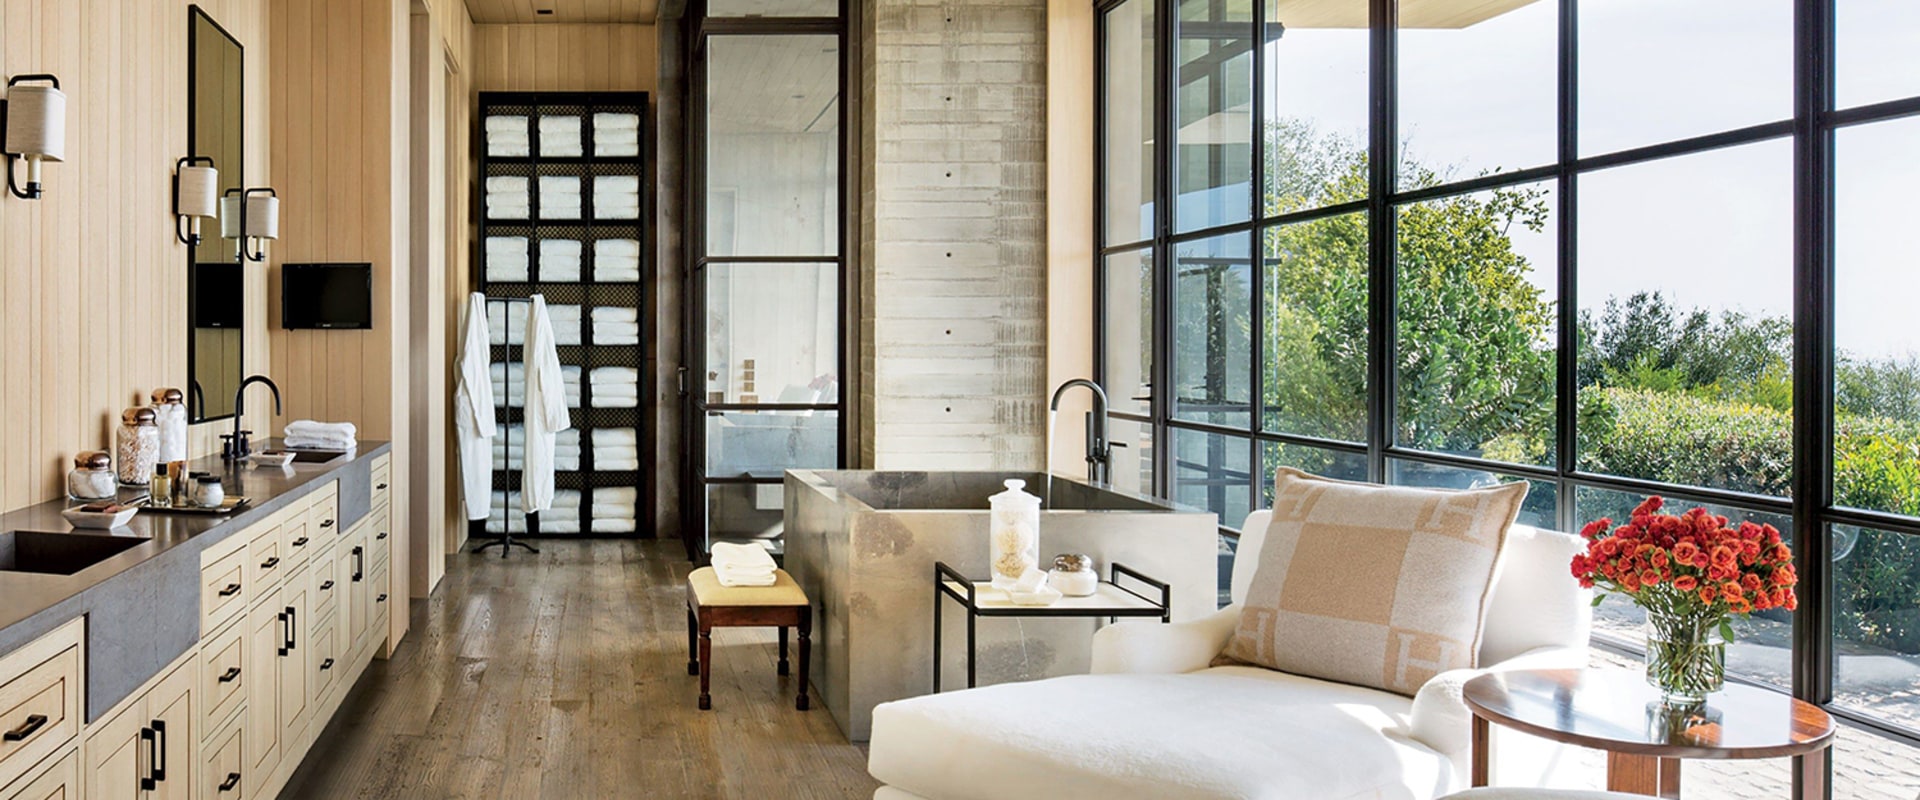 Designing a Spa-Like Bathroom: Transform Your Home into a Relaxing Oasis